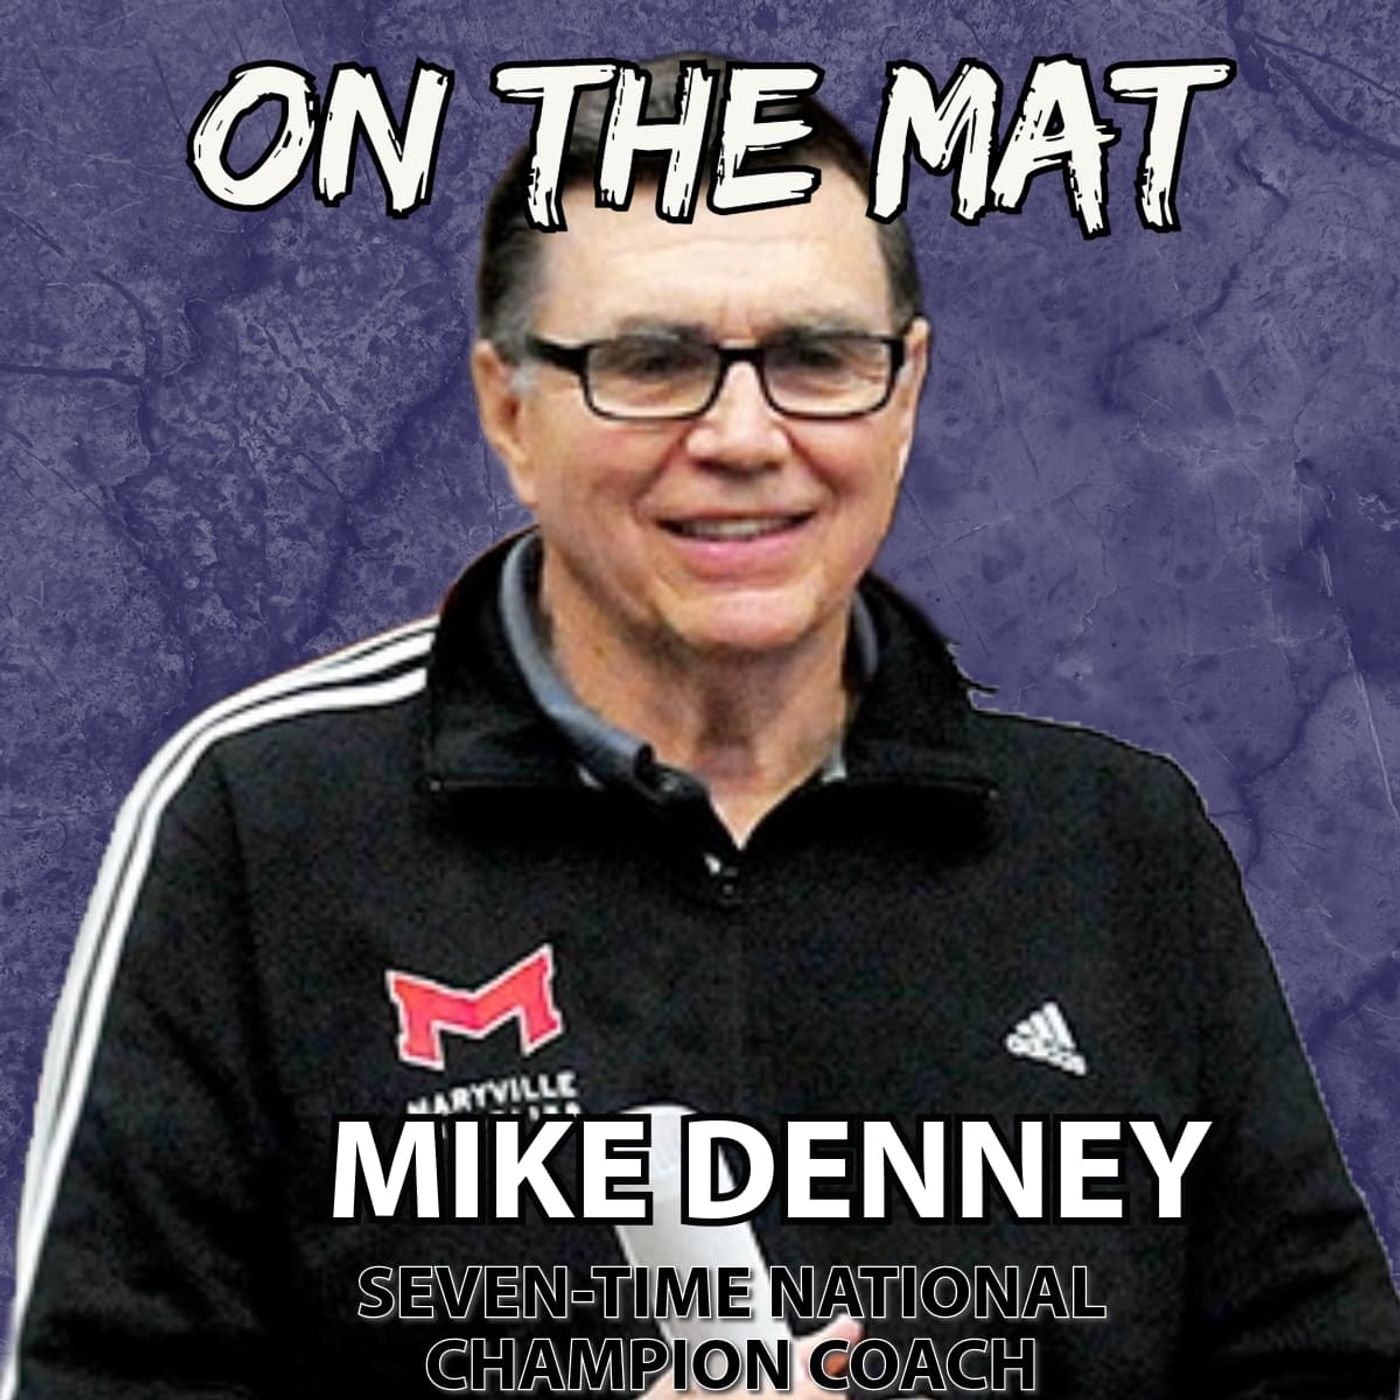 Maryville’s Mike Denney, seven-time national championship winning coach - OTM671